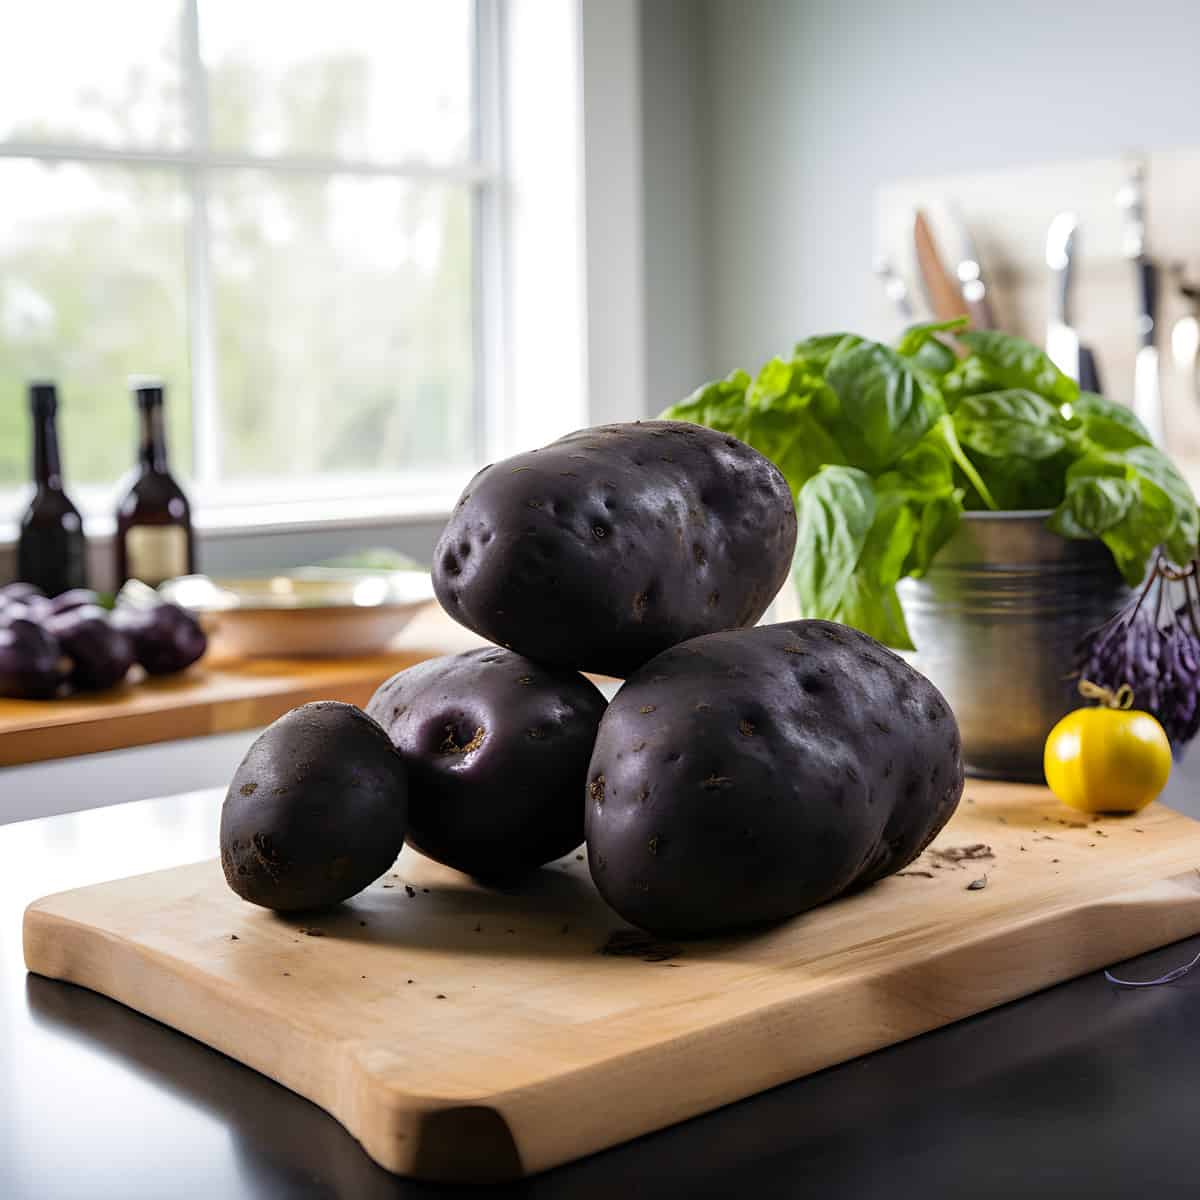 Andean Black Potatoes on a kitchen counter